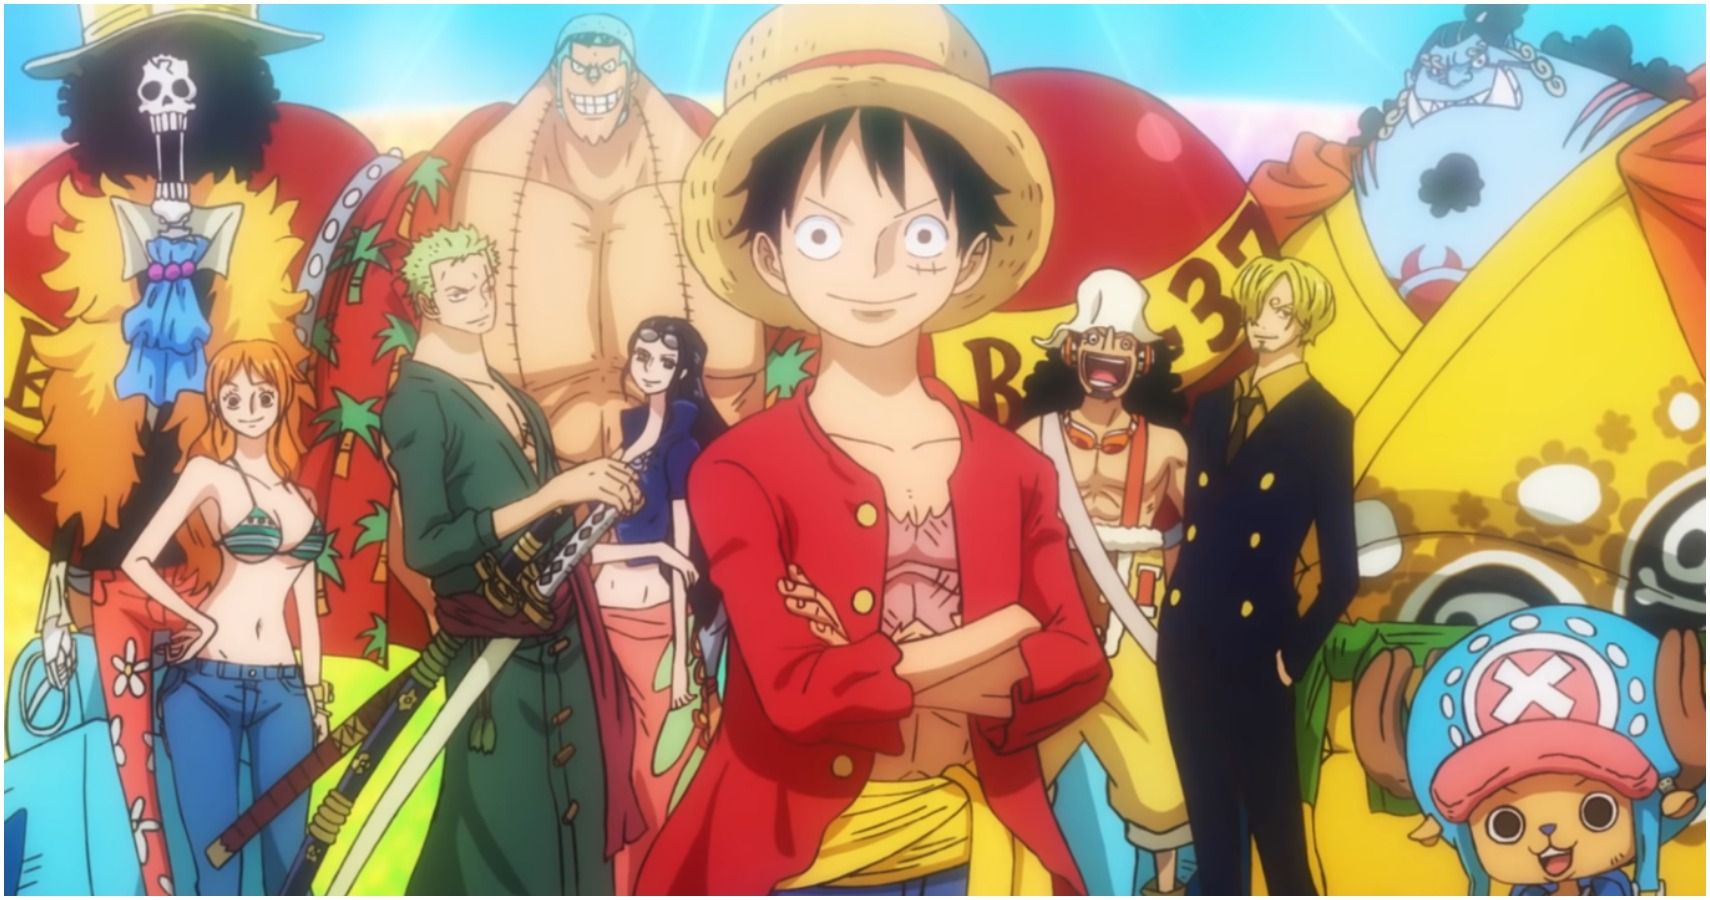 One Piece Straw Hat Luffy! The Man Who Will Become the King of